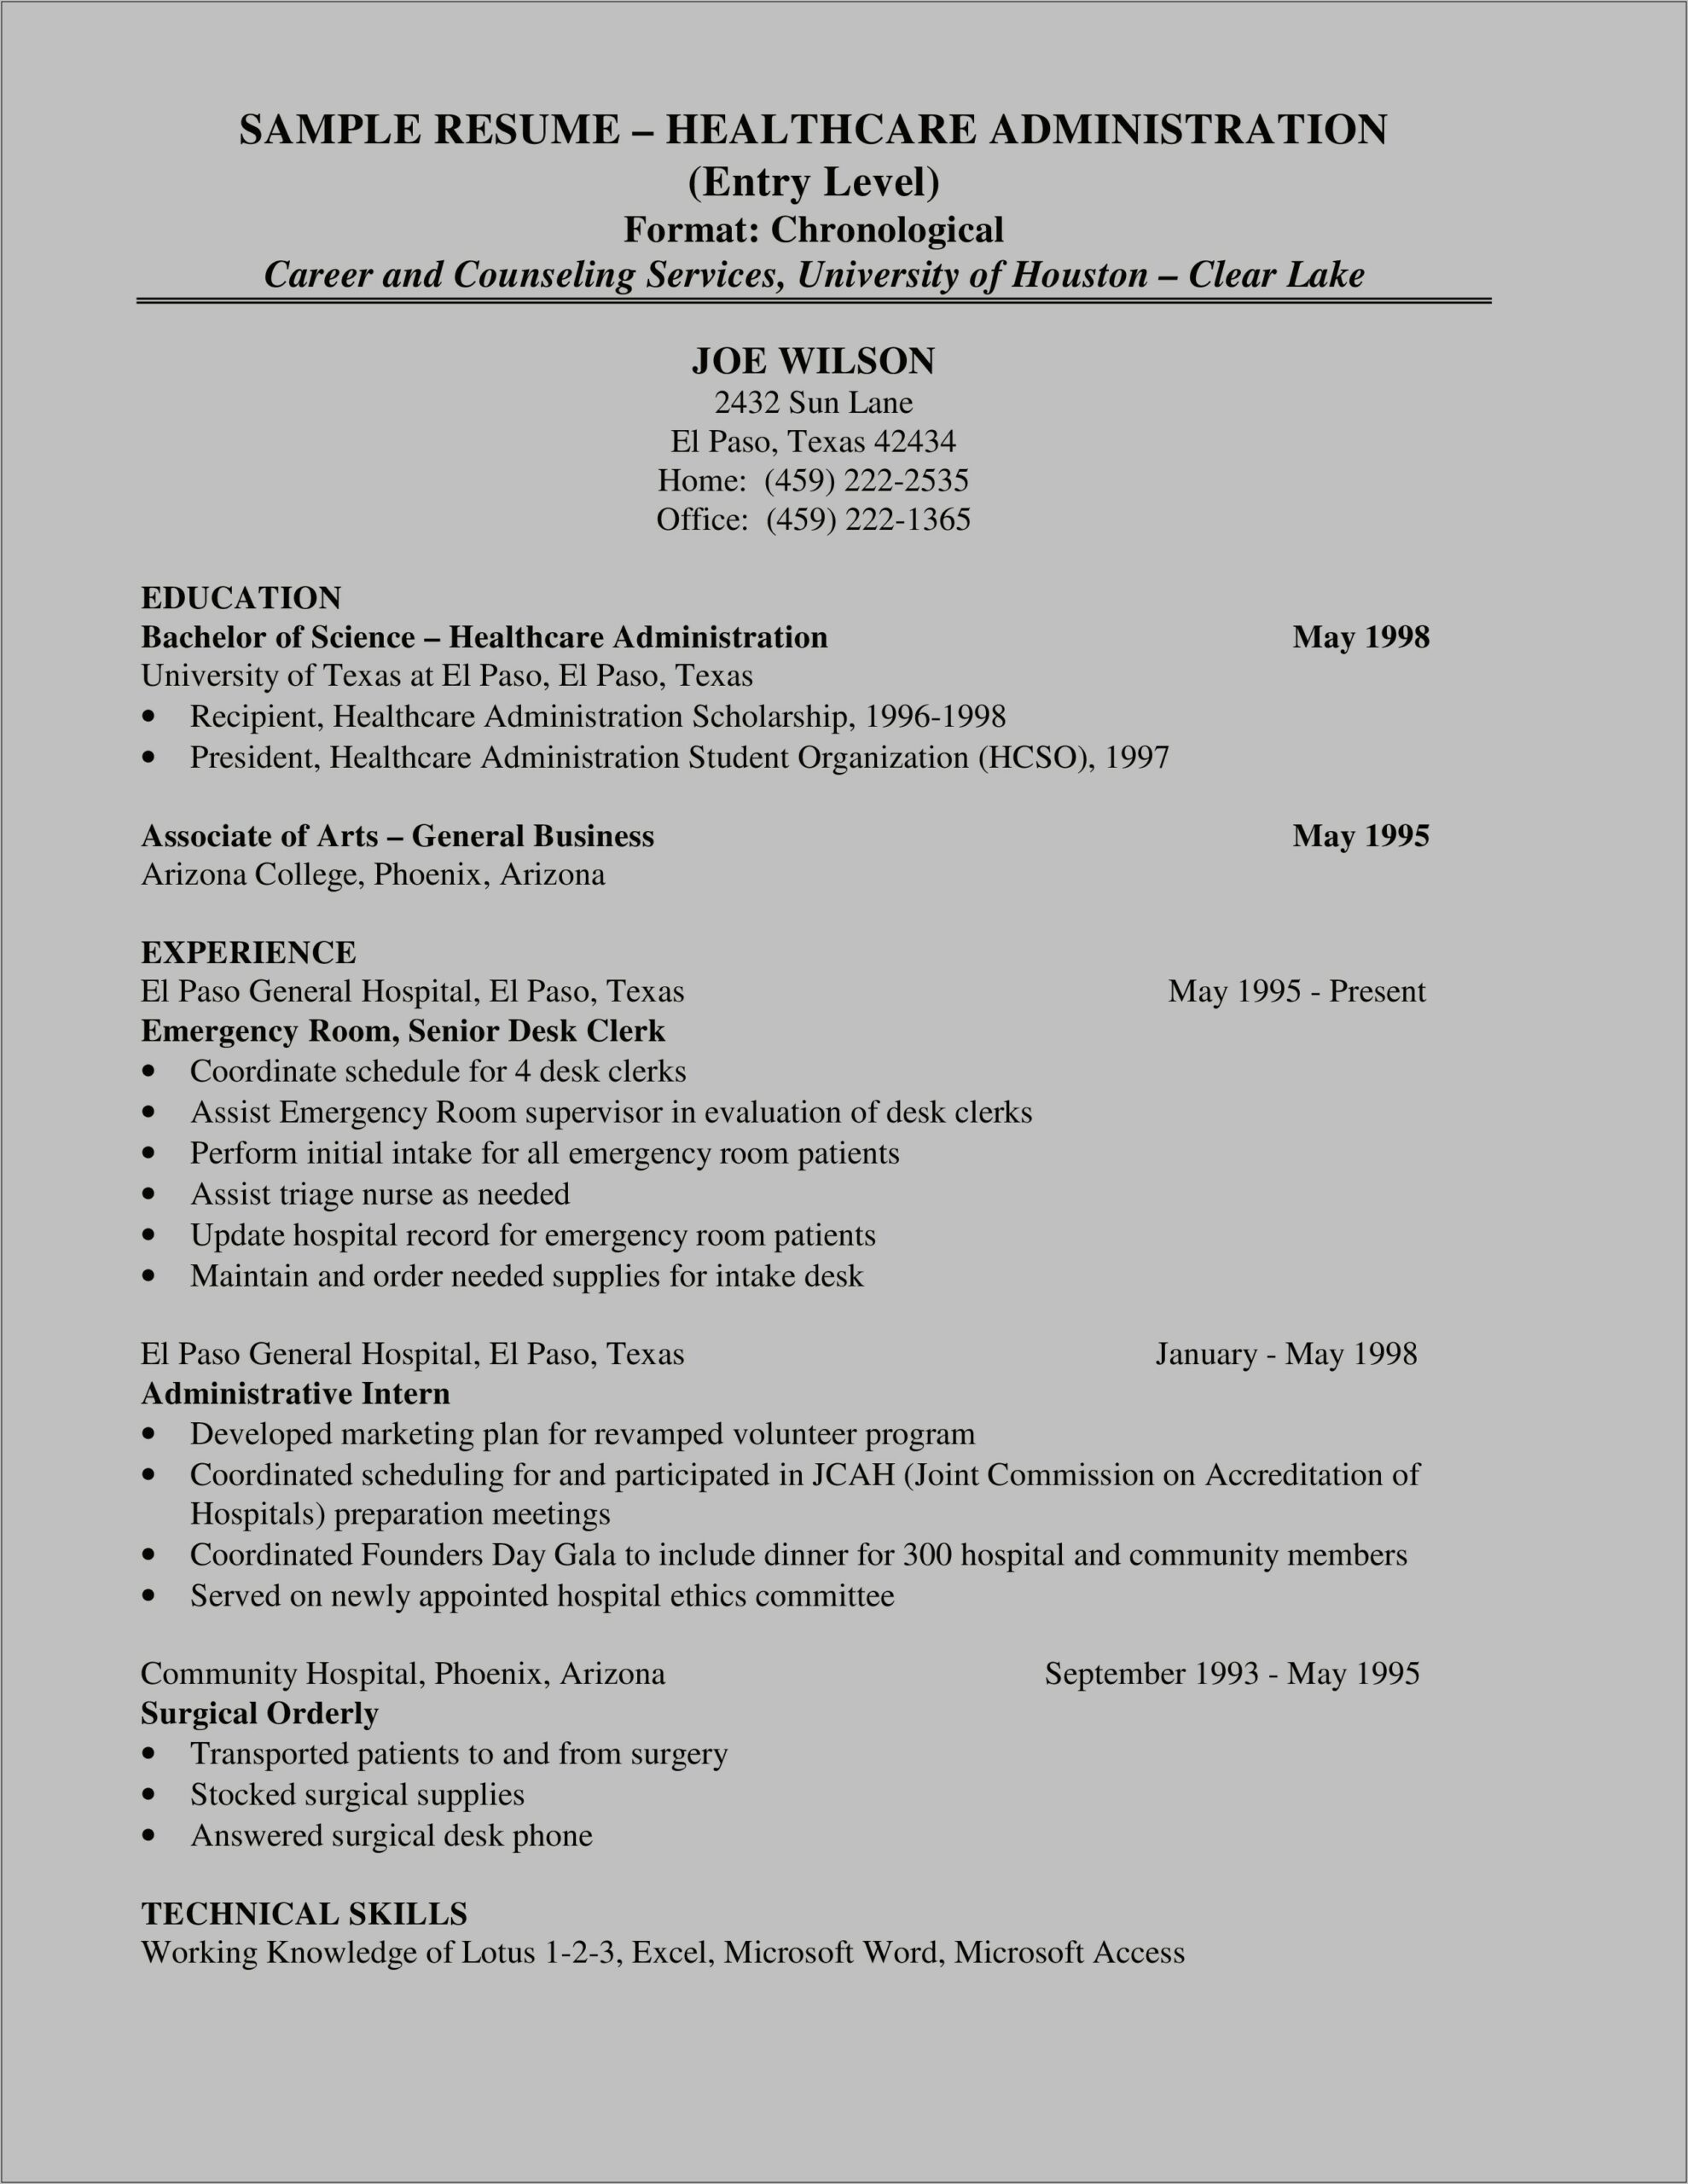 Health Care Administration Resume Example